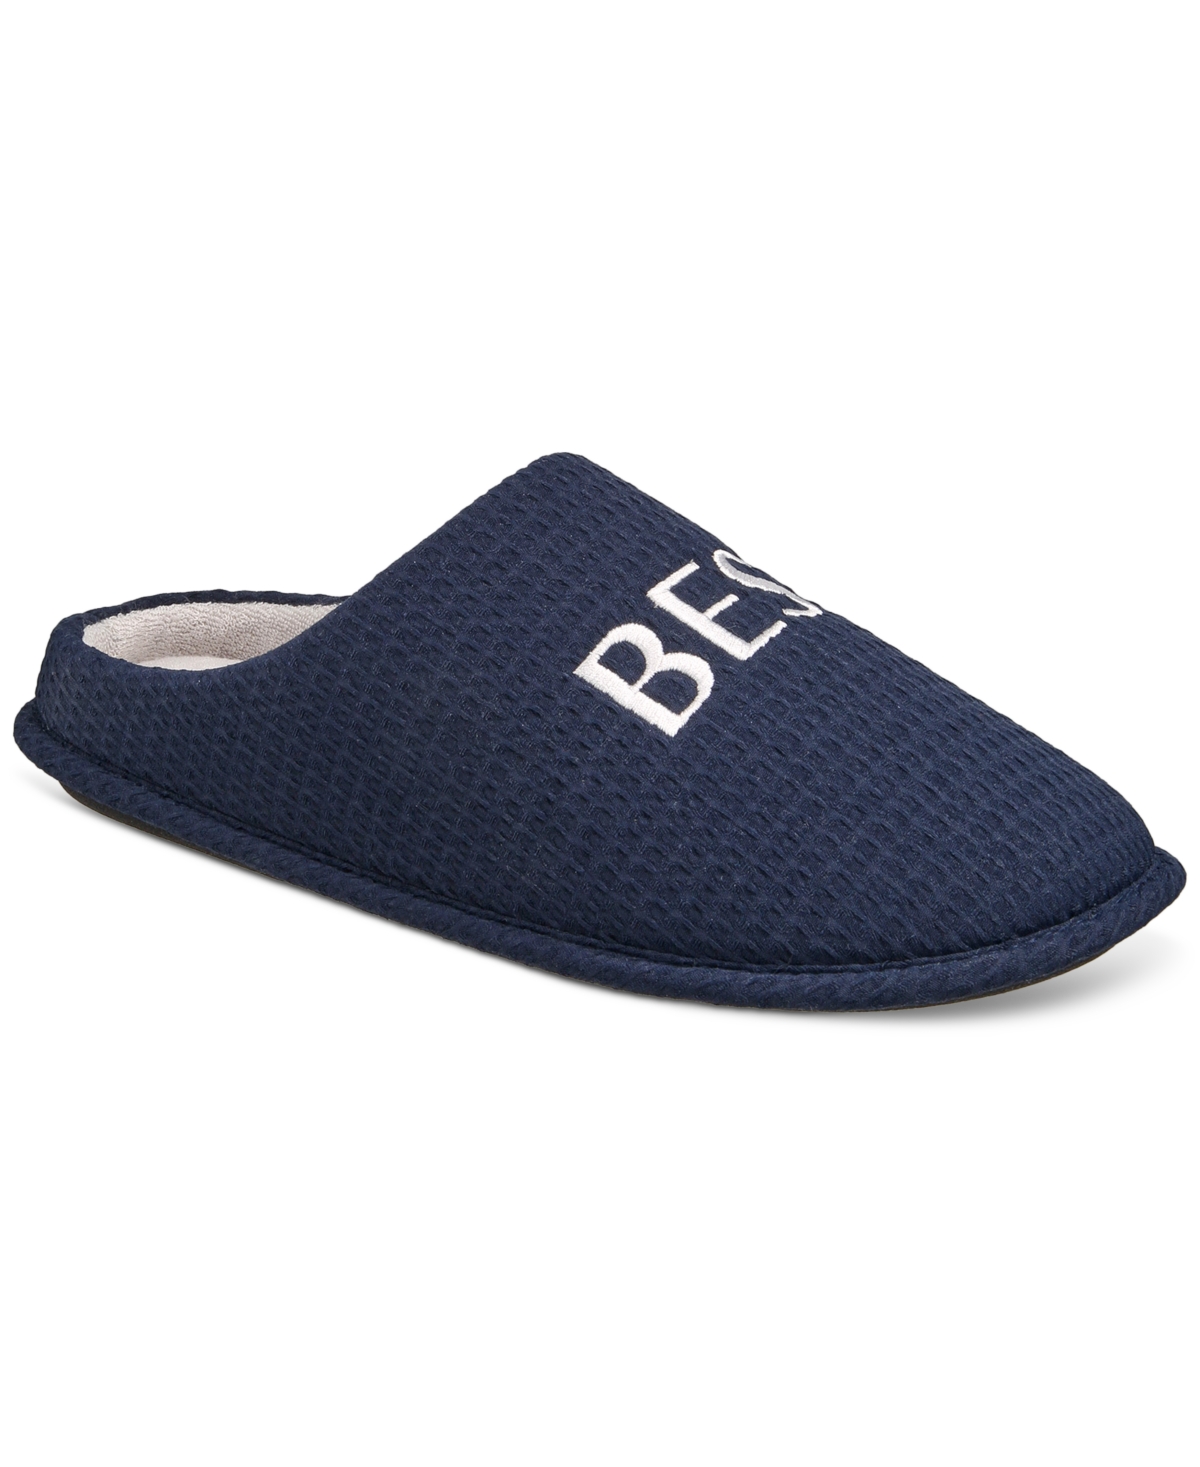 Men's Best Dad Embroidered Slippers, Created for Macy's - Blue